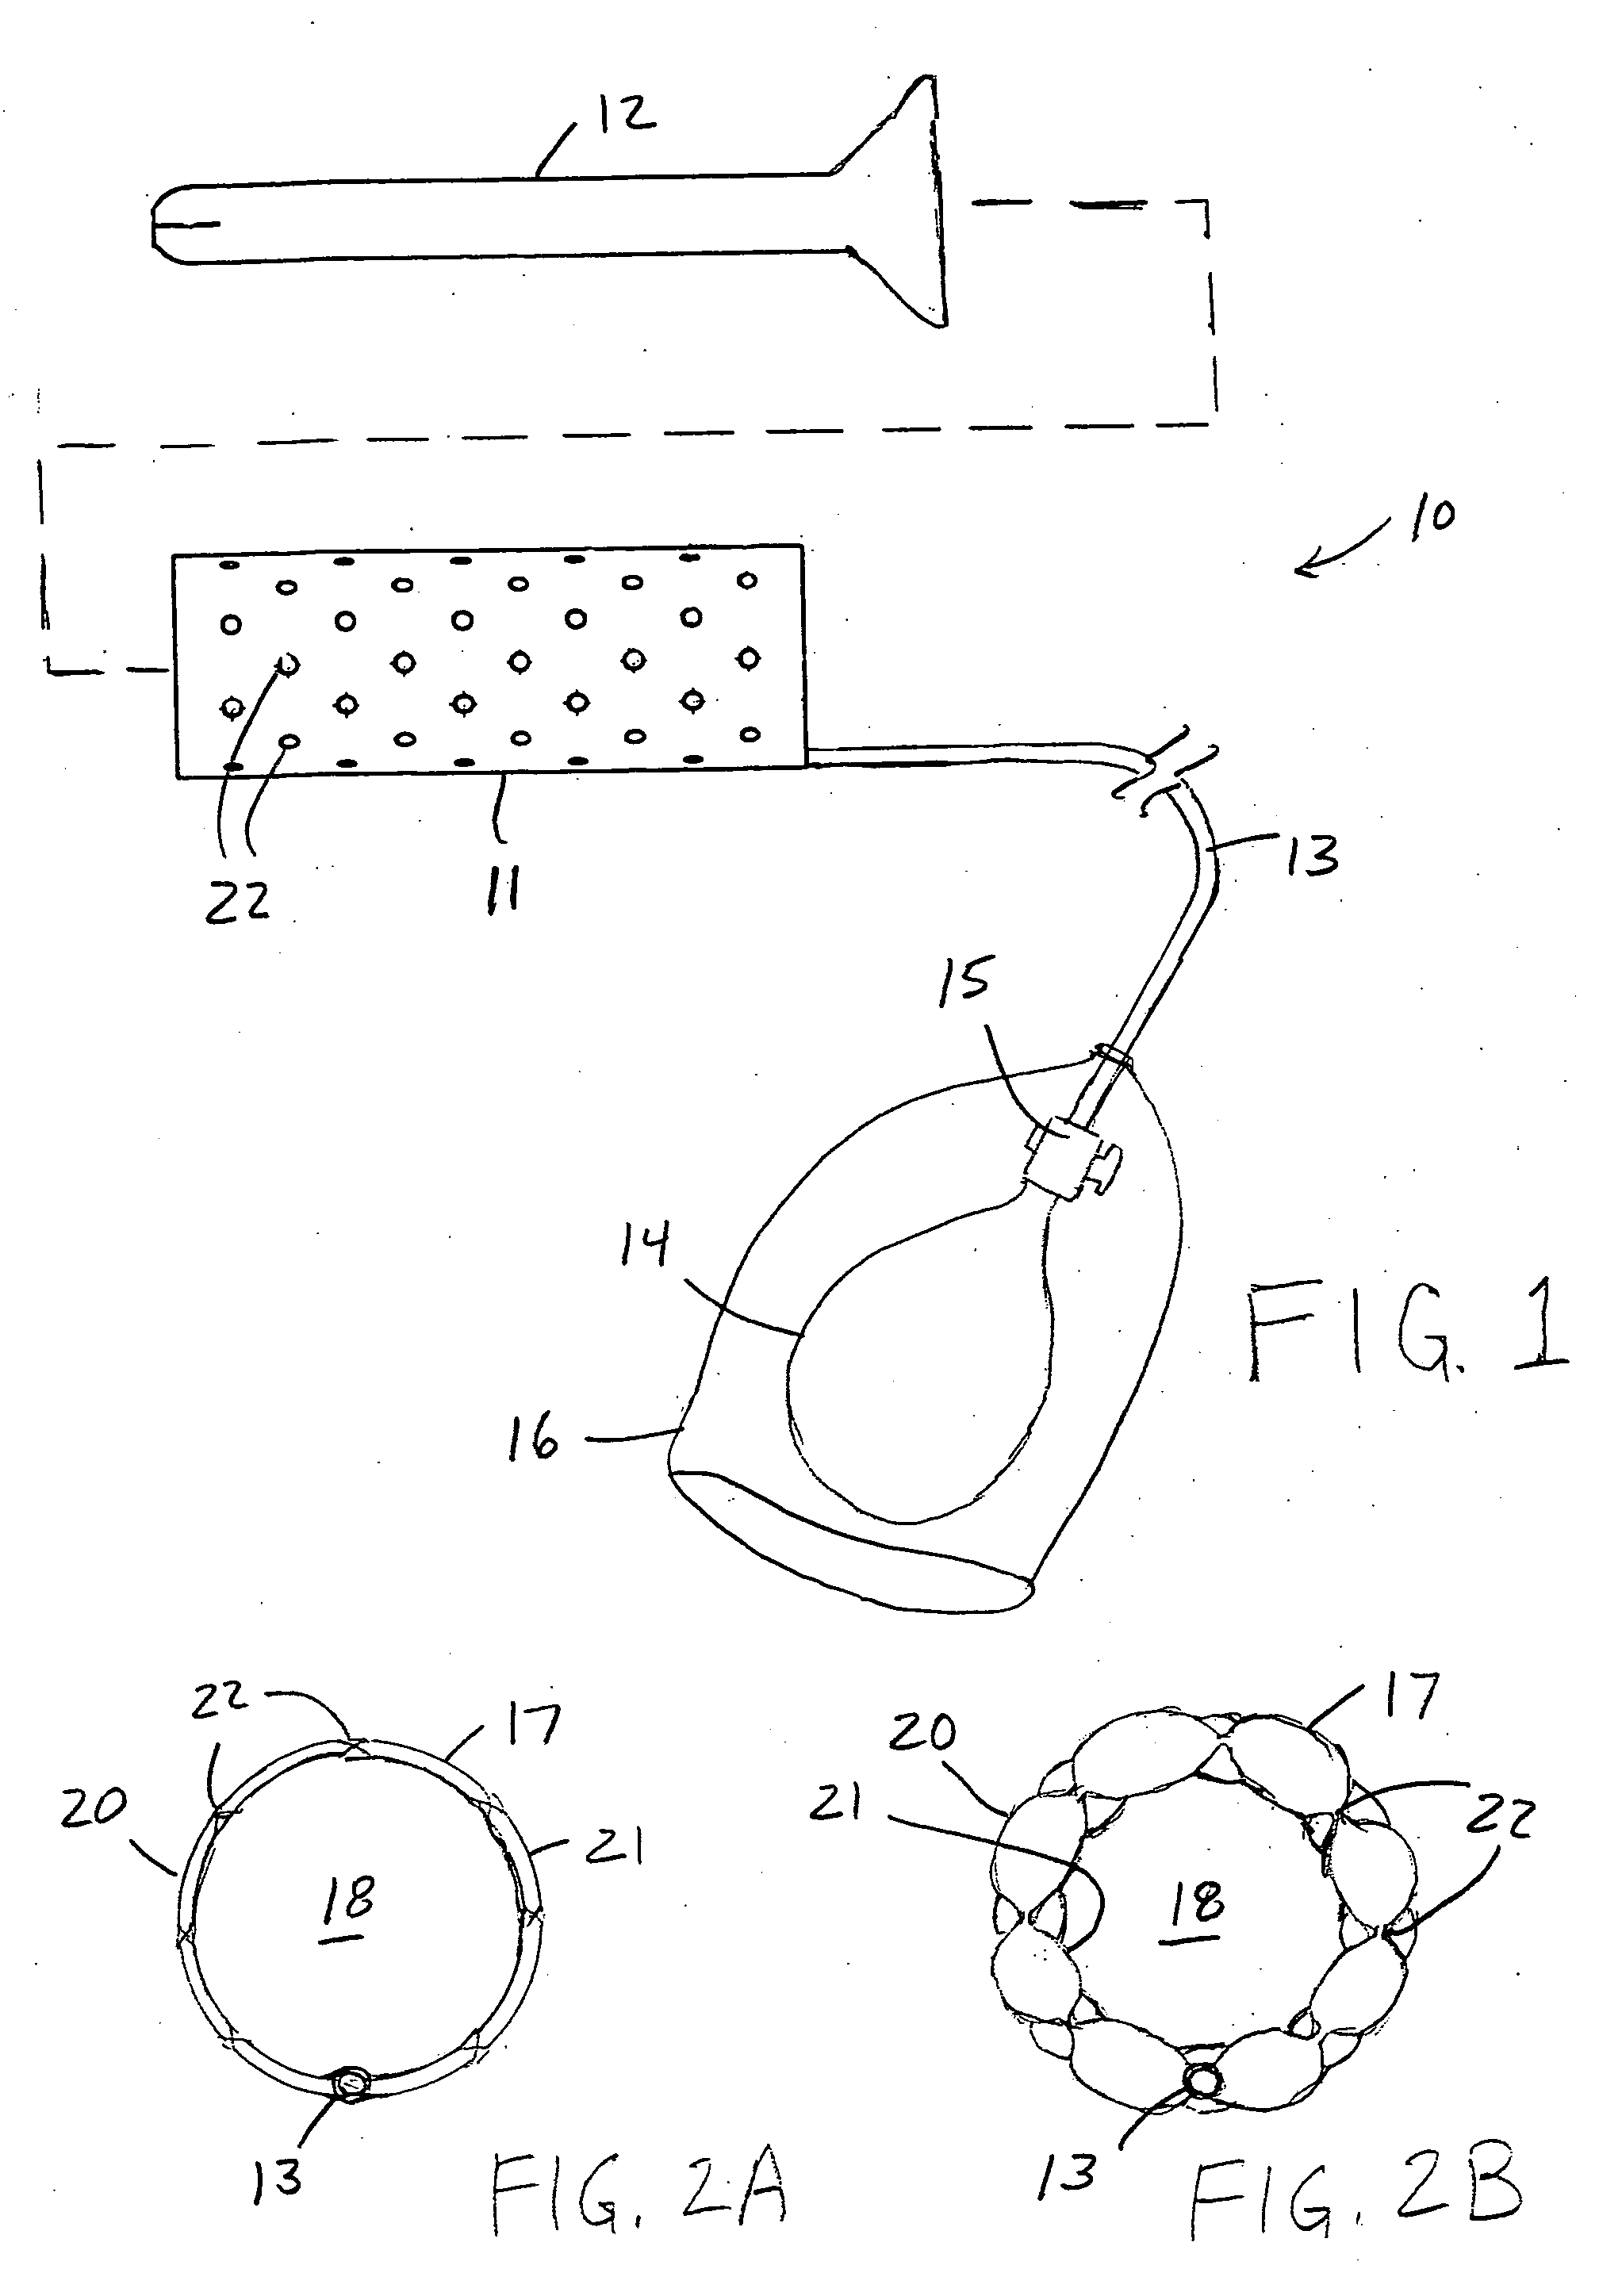 Inflatable apparatus for accessing body cavity and methods of making